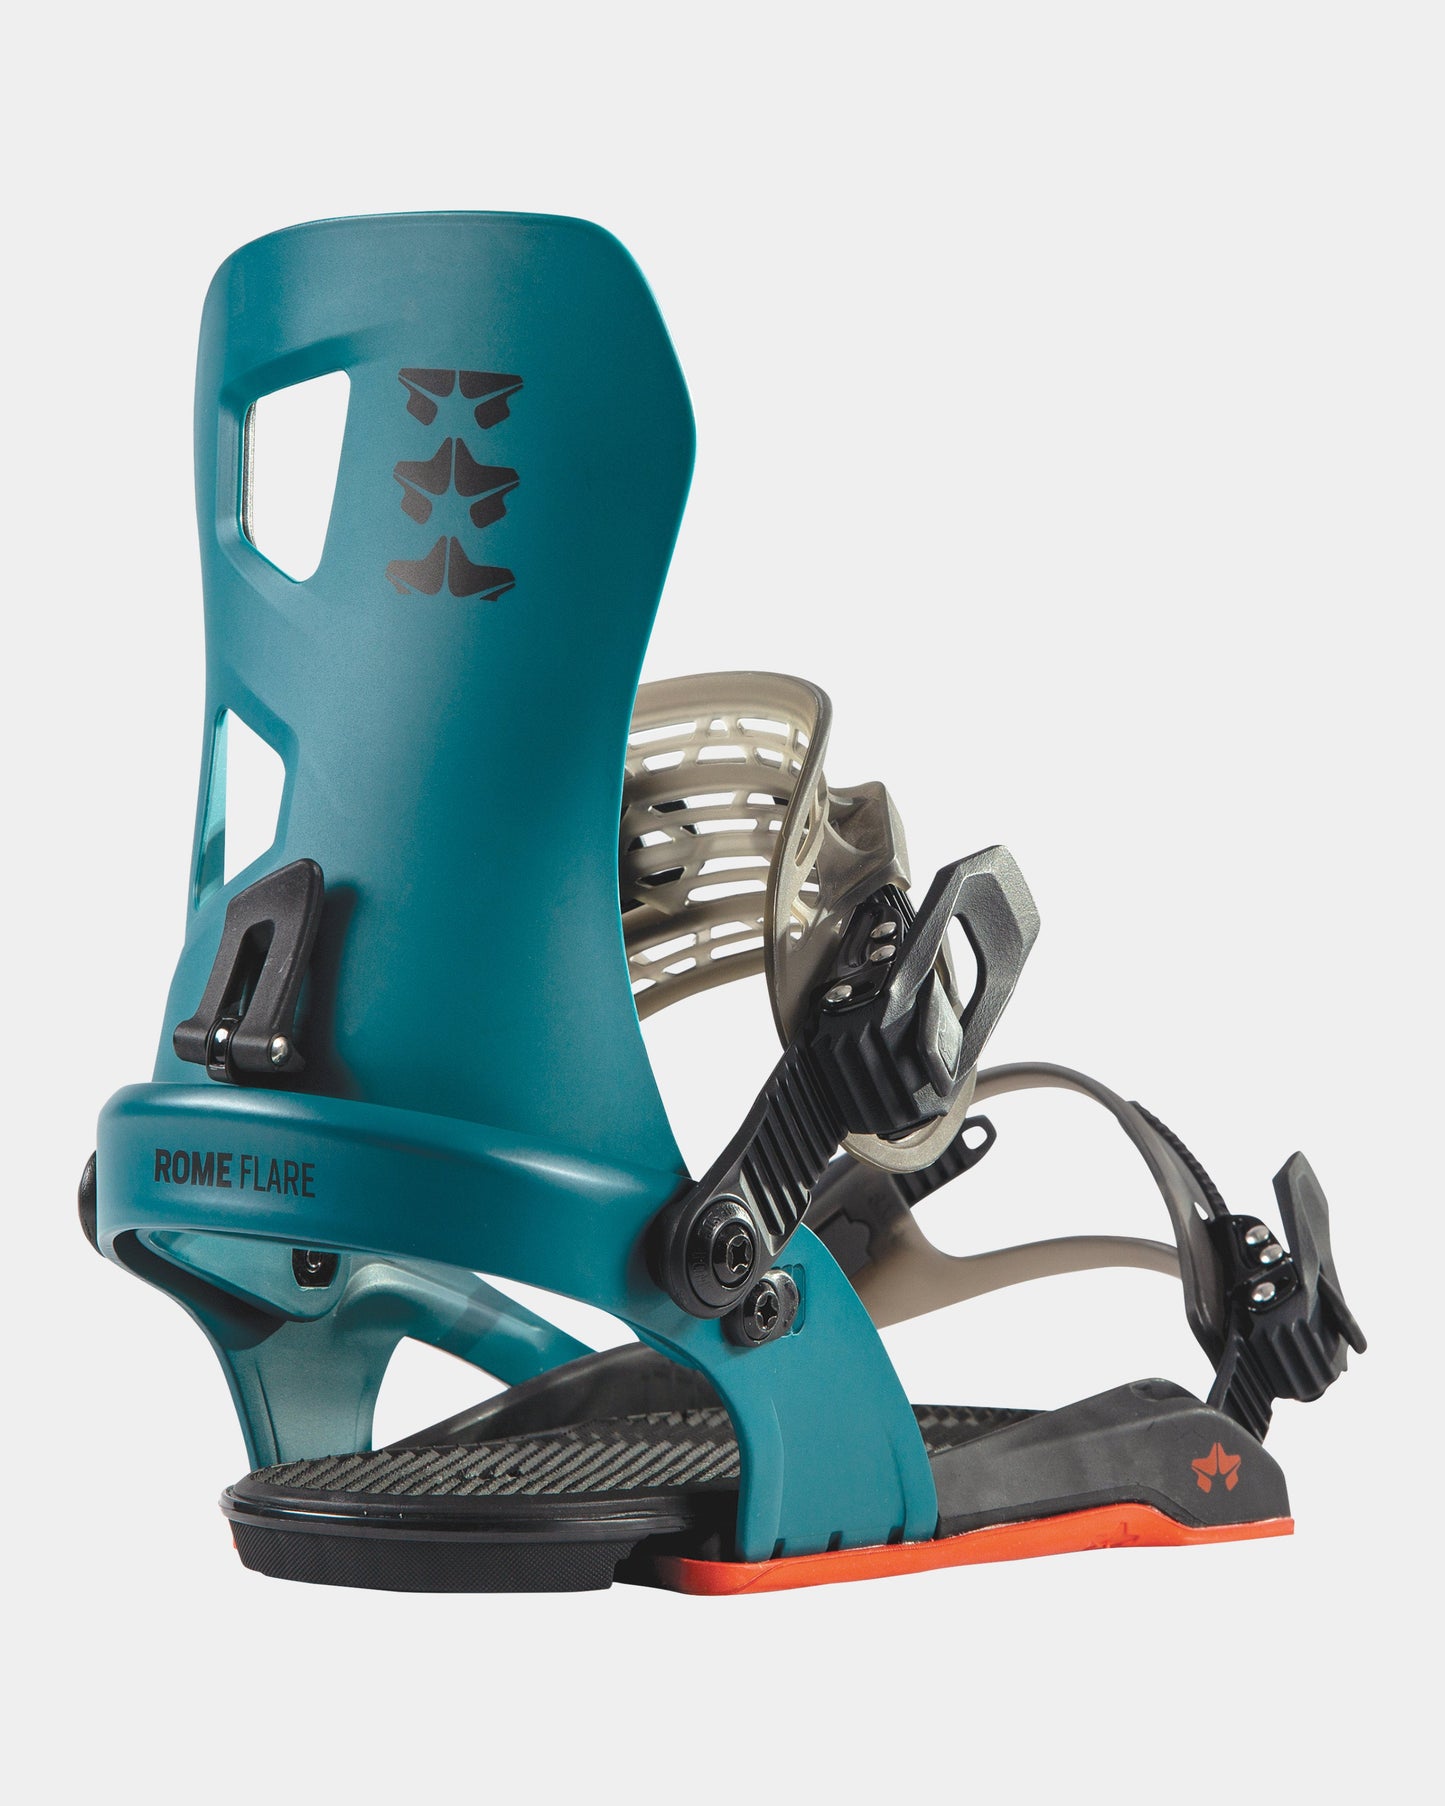 Rome Flare bindings 2022 womens snowboard bindings product photo from the back cover shot in the studio color berry